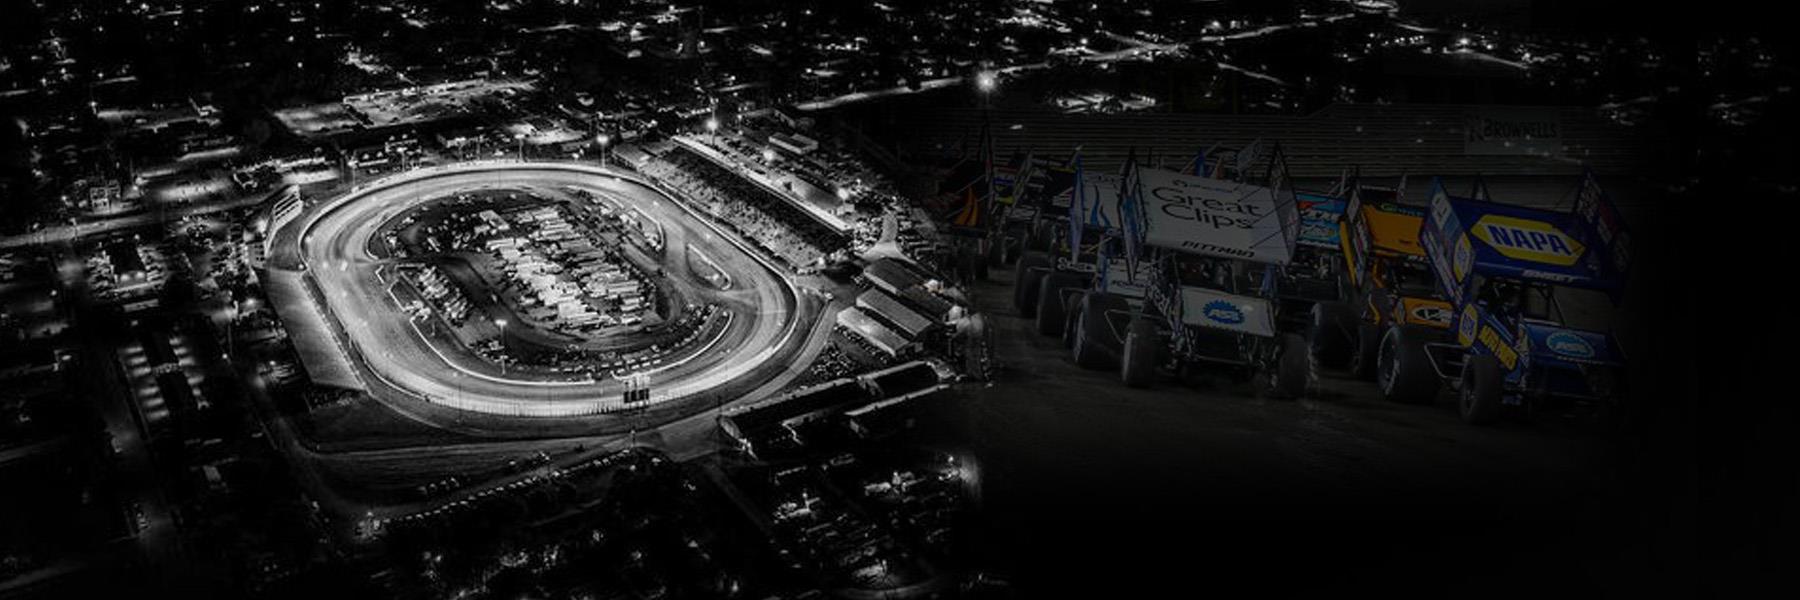 7/30/2022 - Knoxville Raceway